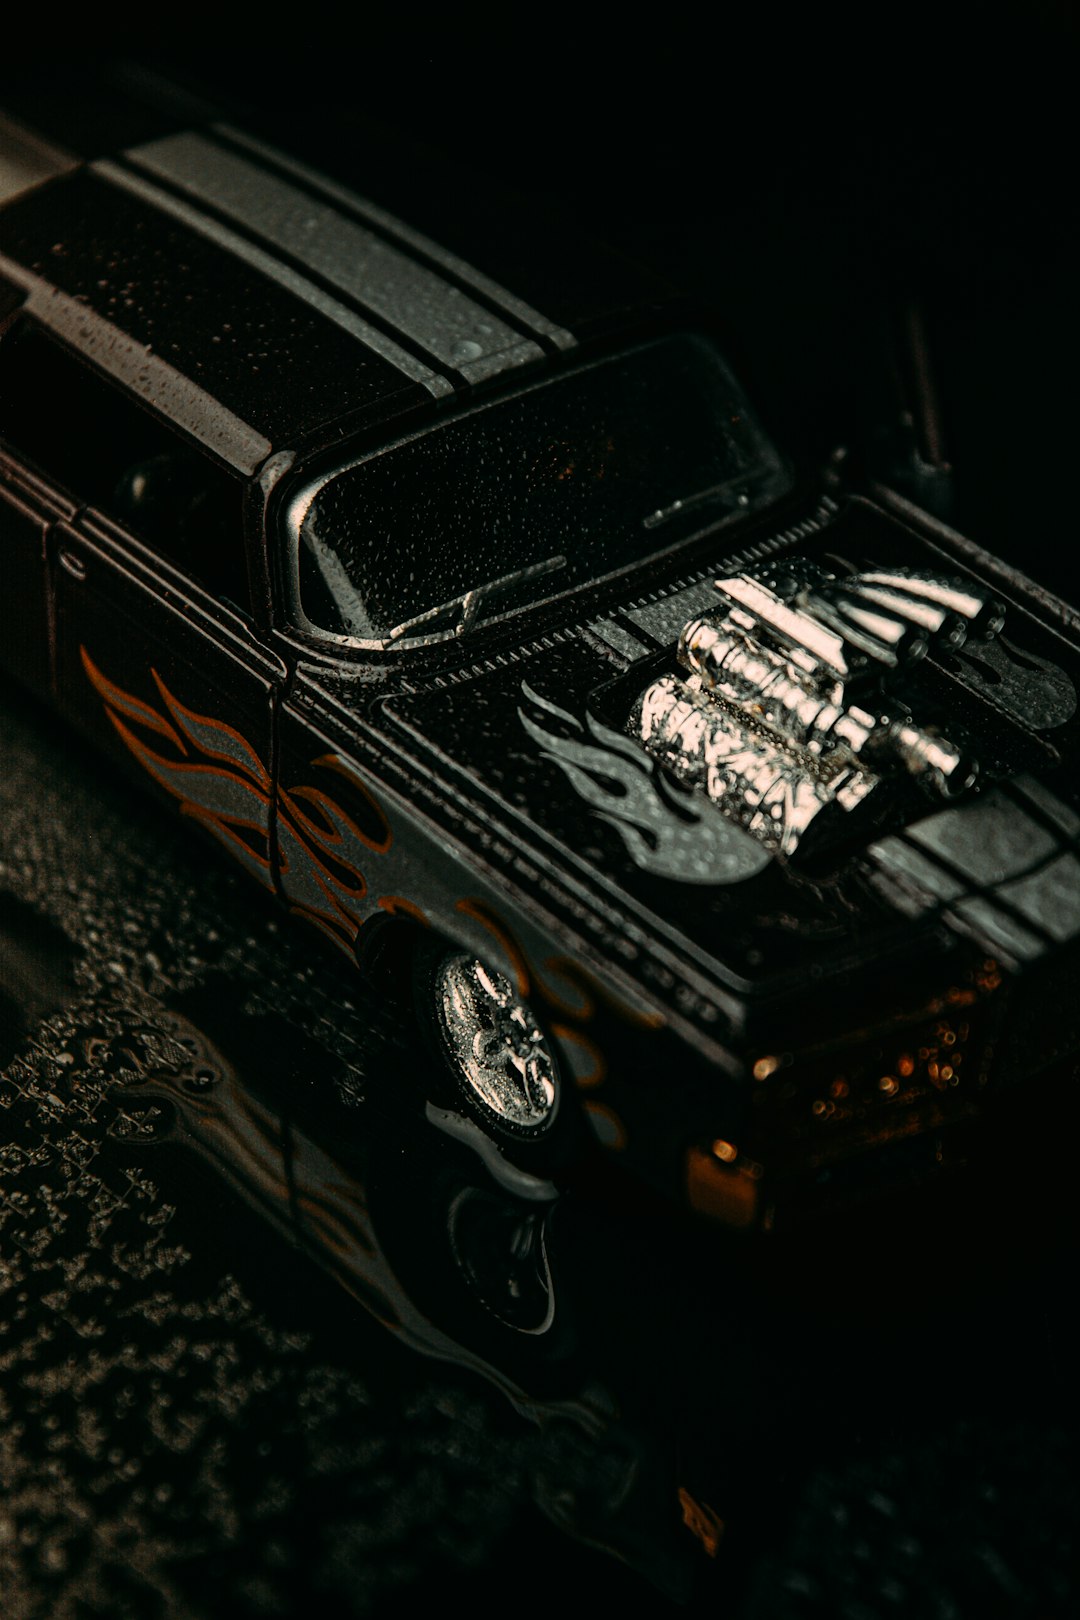 black and white vintage car scale model